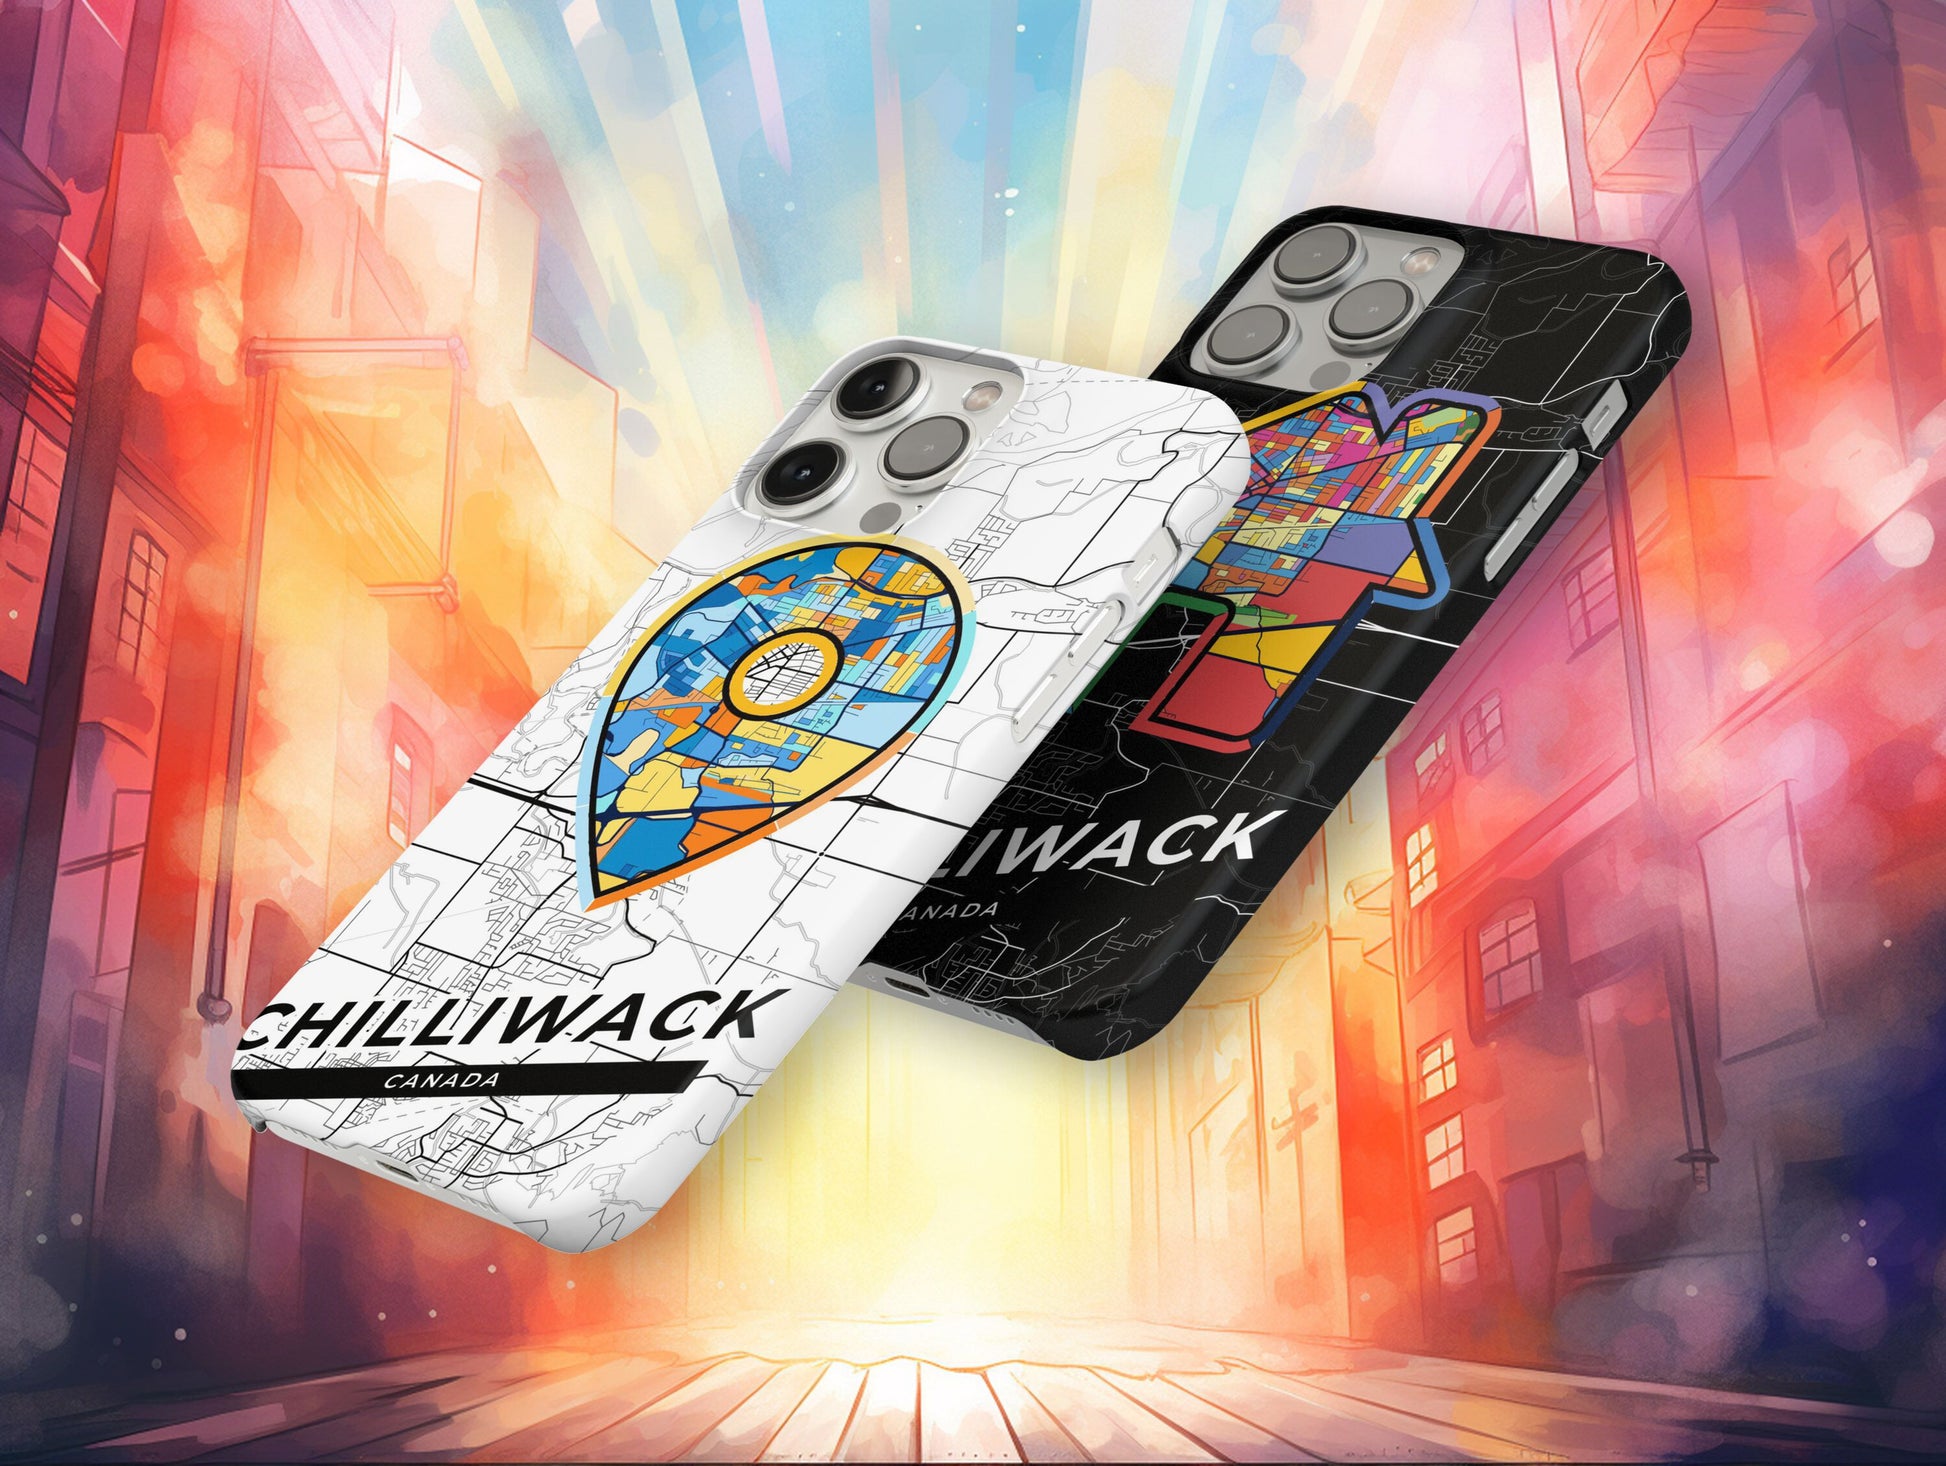 Chilliwack Canada slim phone case with colorful icon. Birthday, wedding or housewarming gift. Couple match cases.